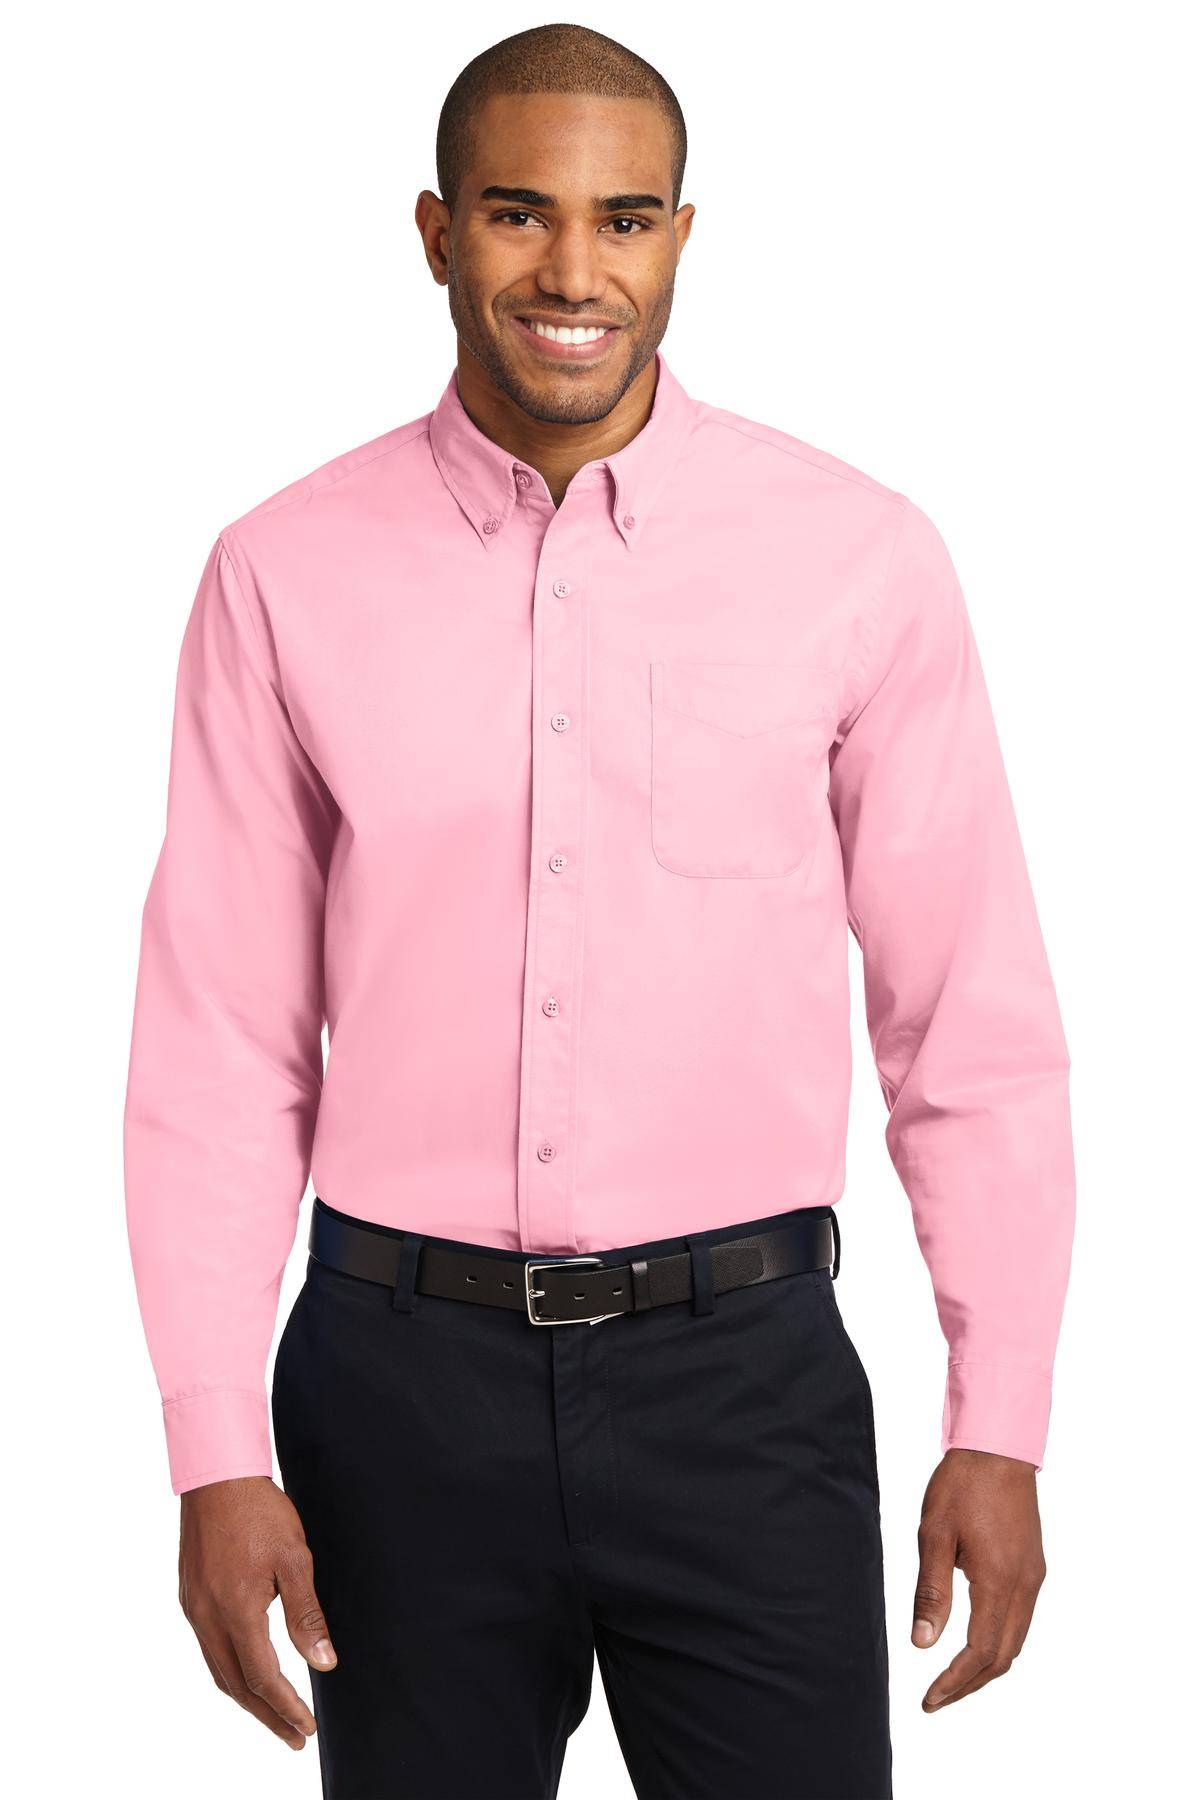 Port Authority S608 Mens Long Sleeve Wrinkle Resistant Button Down Easy Care Shirt With Pocket